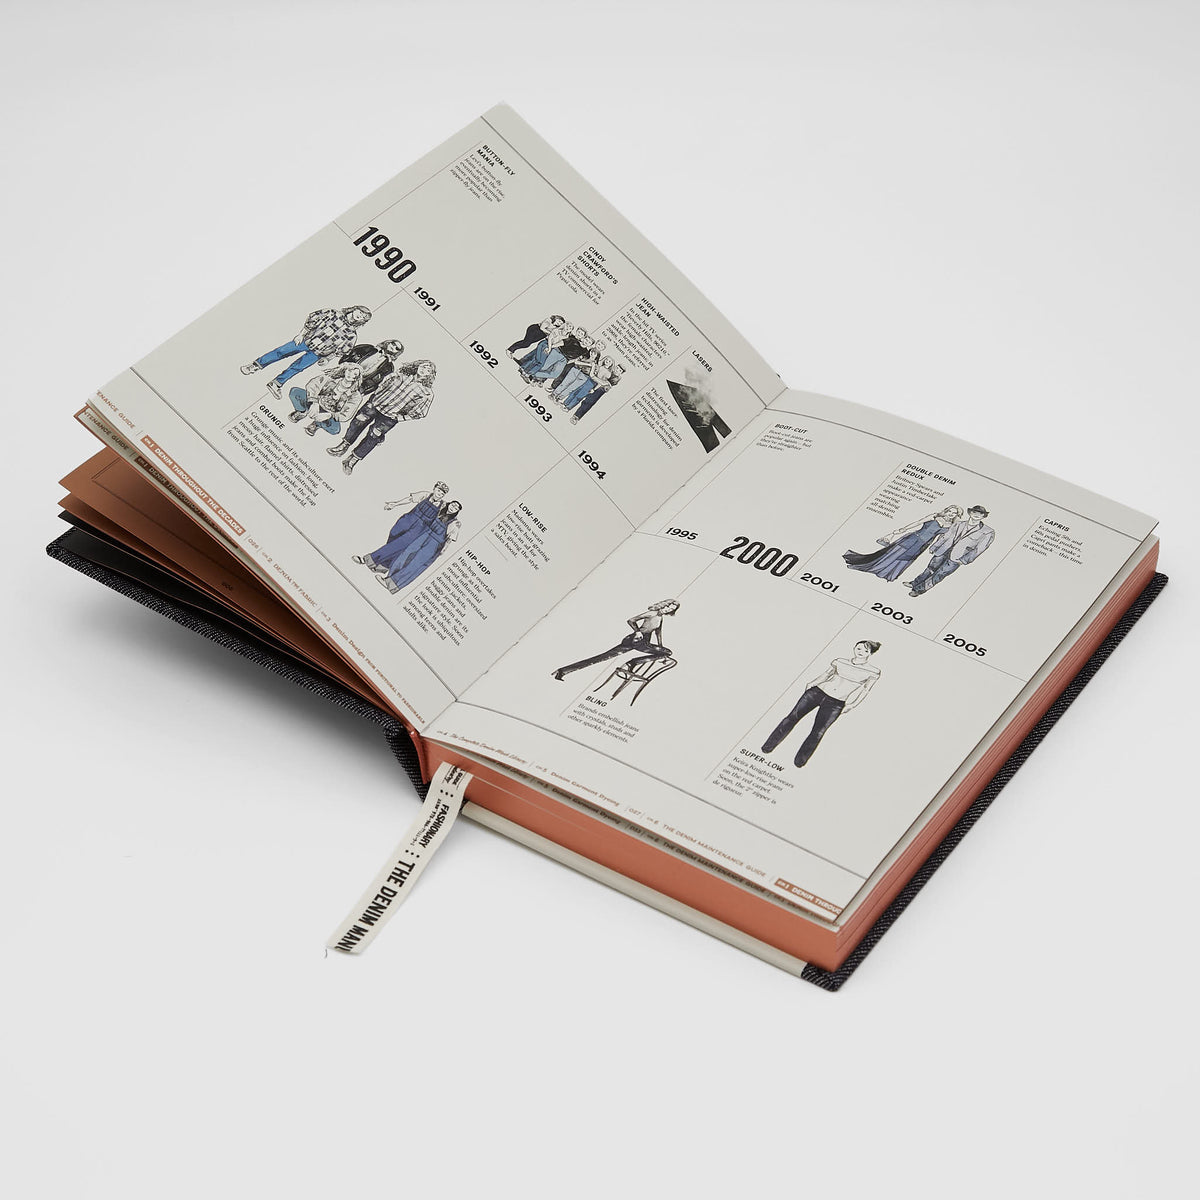 The Denim Manual – a Complete Visual Guide for the Denim Industry